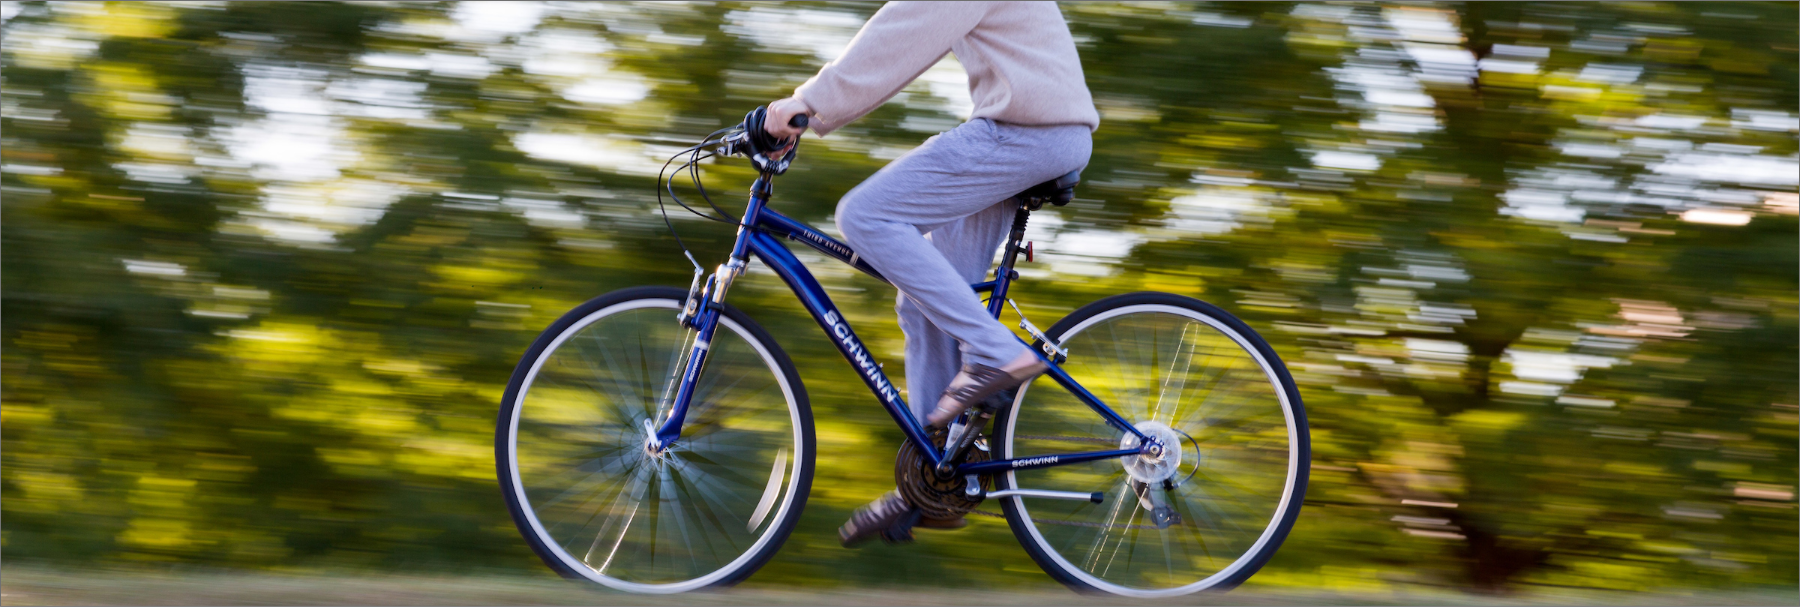 Person riding a bike on a scenic path with motion blur in the background and high focus on the person on the bike.